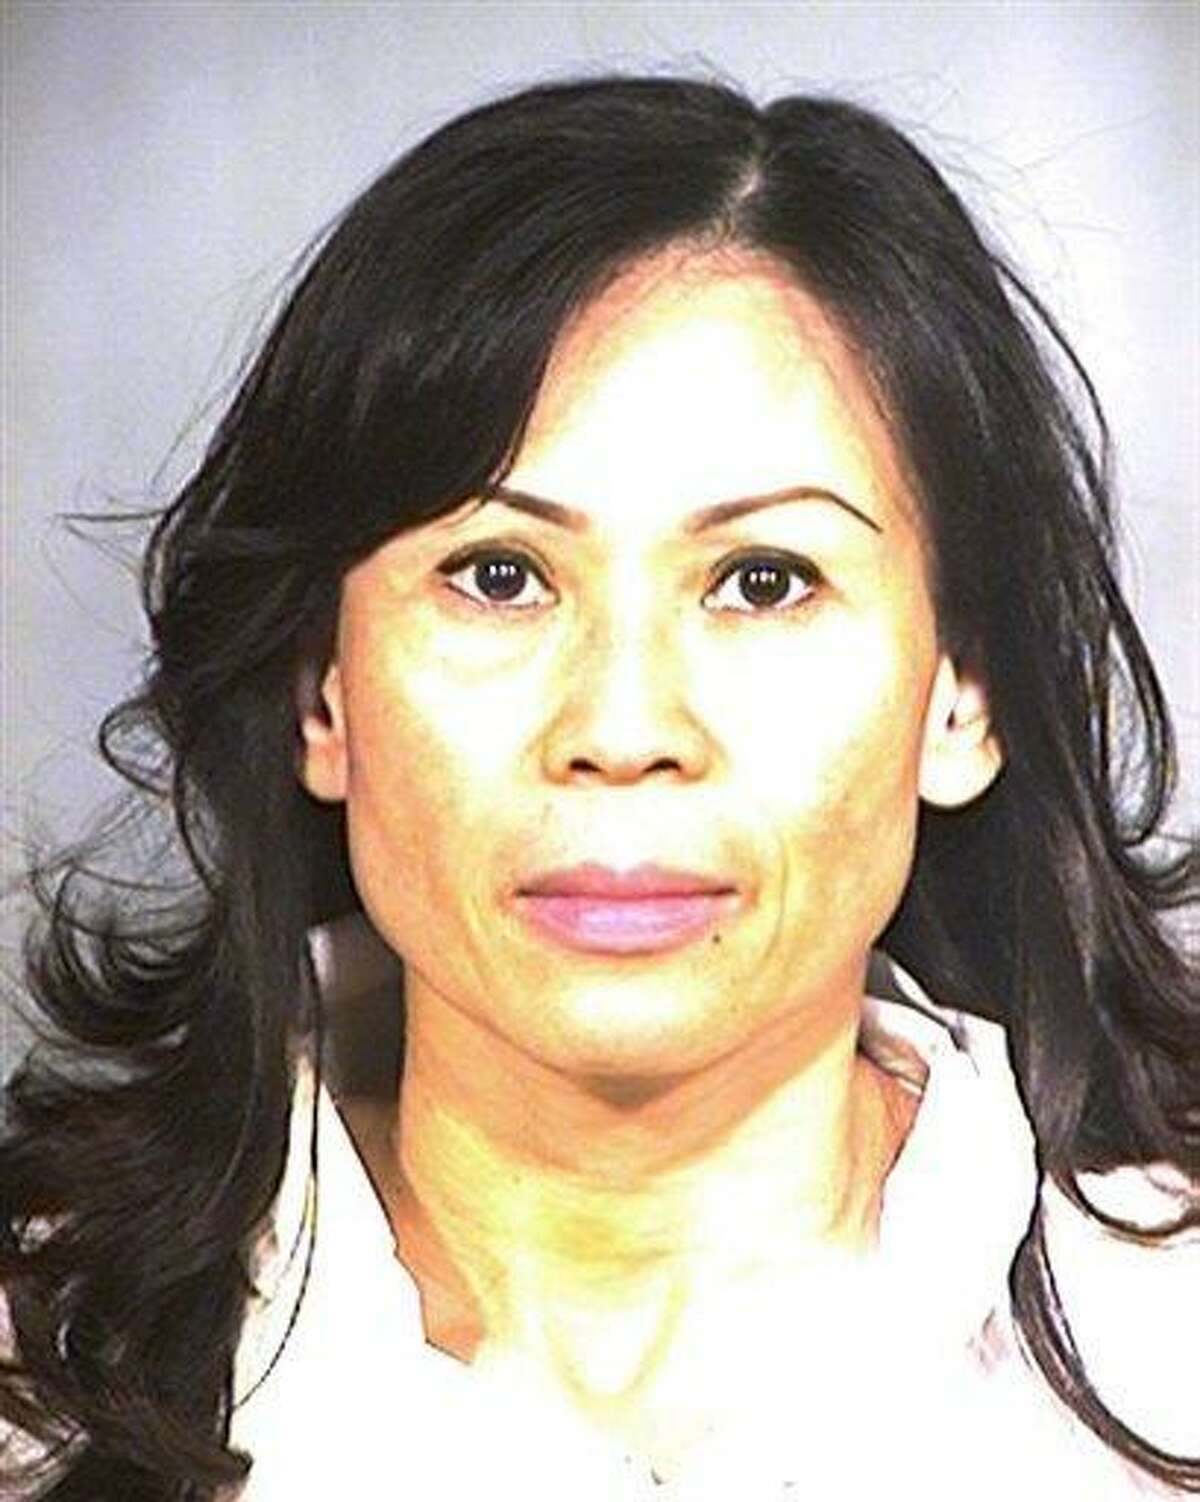 This undated handout photo provided by the Garden Grove Police Dept., shows a police booking photo of Catherine Kieu Becker, 48, who police say drugged her estranged husband, tied him to a bed, cut off his penis with a knife and threw it down a garbage disposal in her home in Garden Grove, Calif. Becker is due in court Wednesday, July 13, 2011. (AP Photo/Garden Grove Police Dept.)